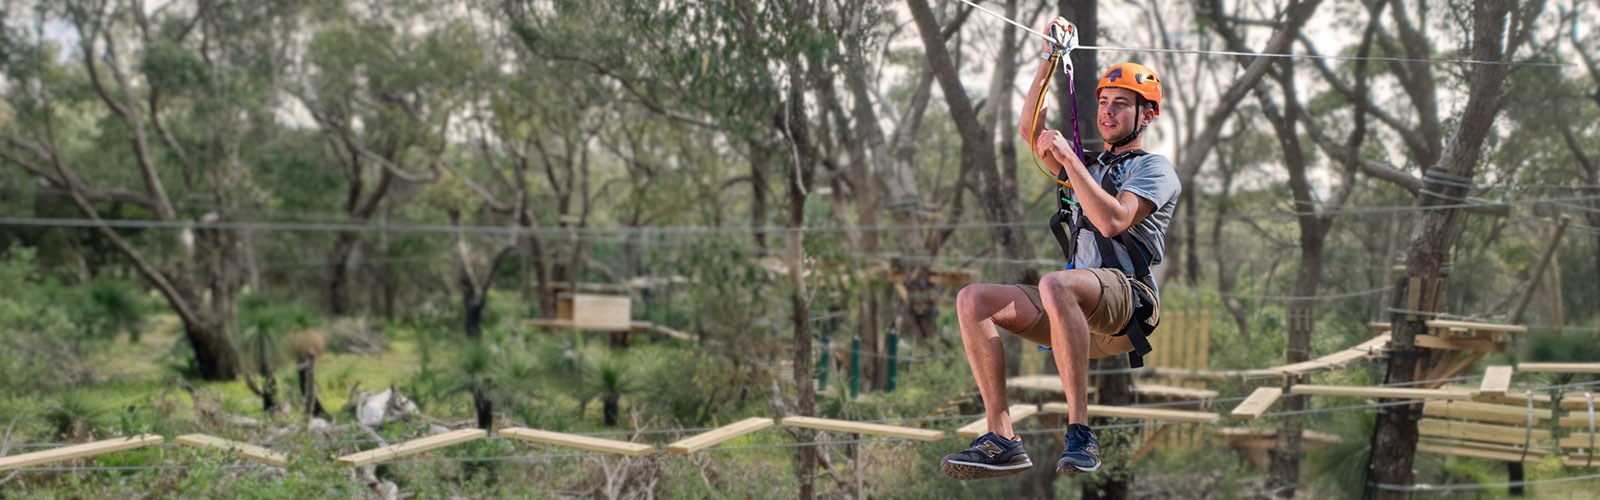 Treetops Adventure Yanchep High Ropes Course